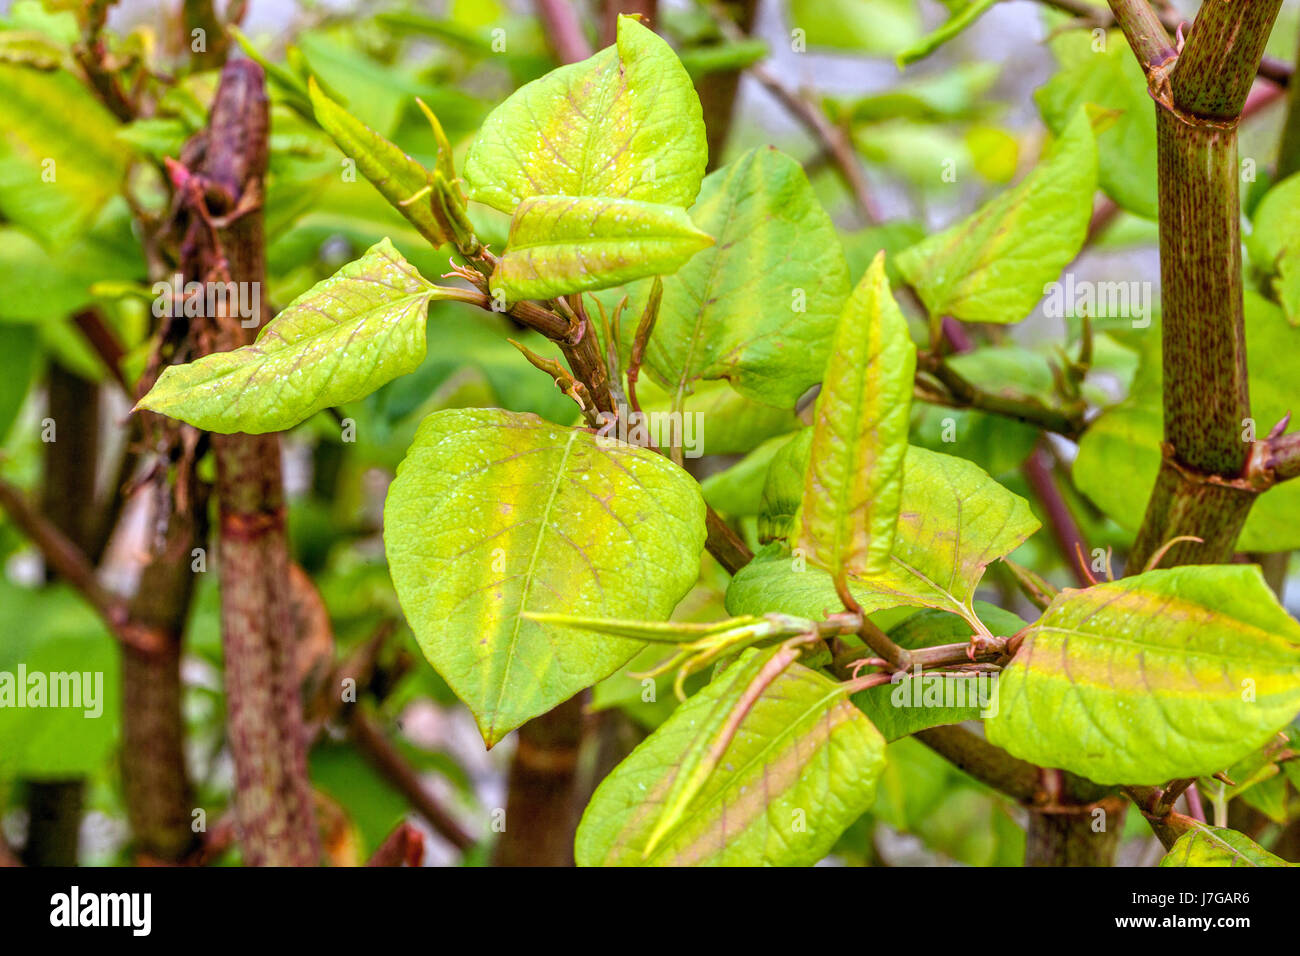 Japanese Knotweed, Fallopia japonica Reynoutria japonica, young leaves shoots Stock Photo